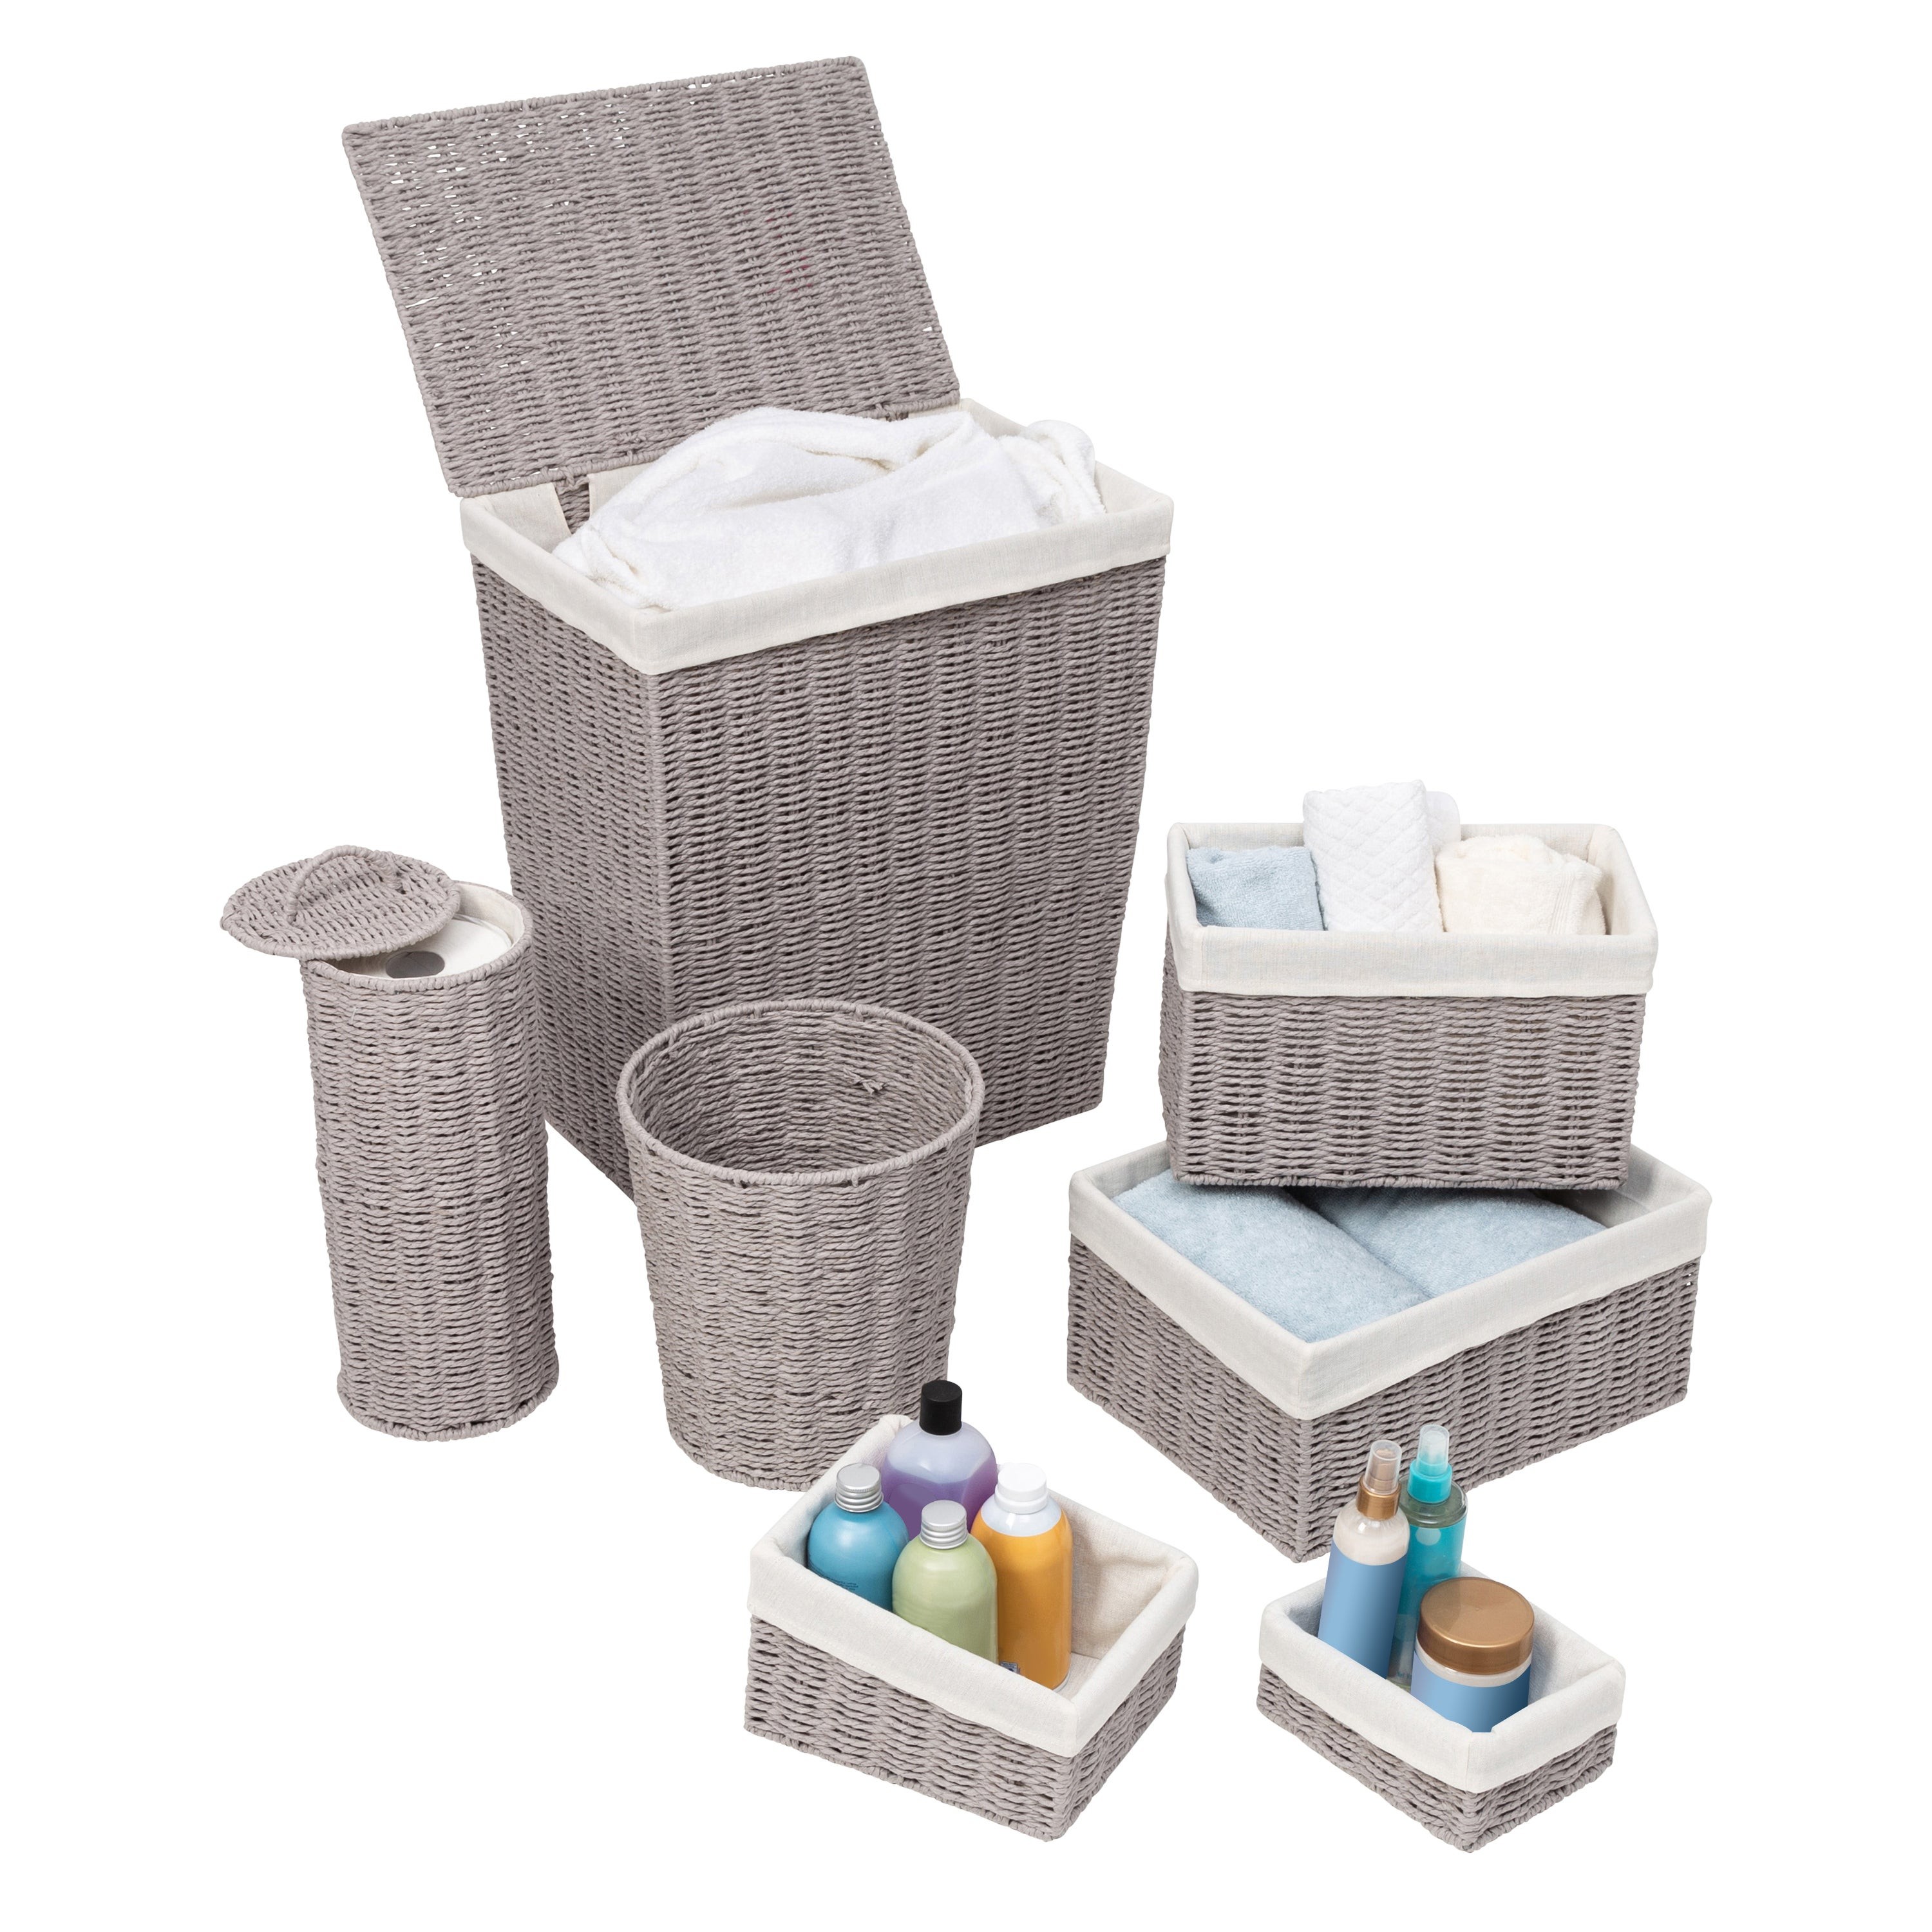 7pc Twisted Paper Rope Woven Bathroom Storage Basket Gray